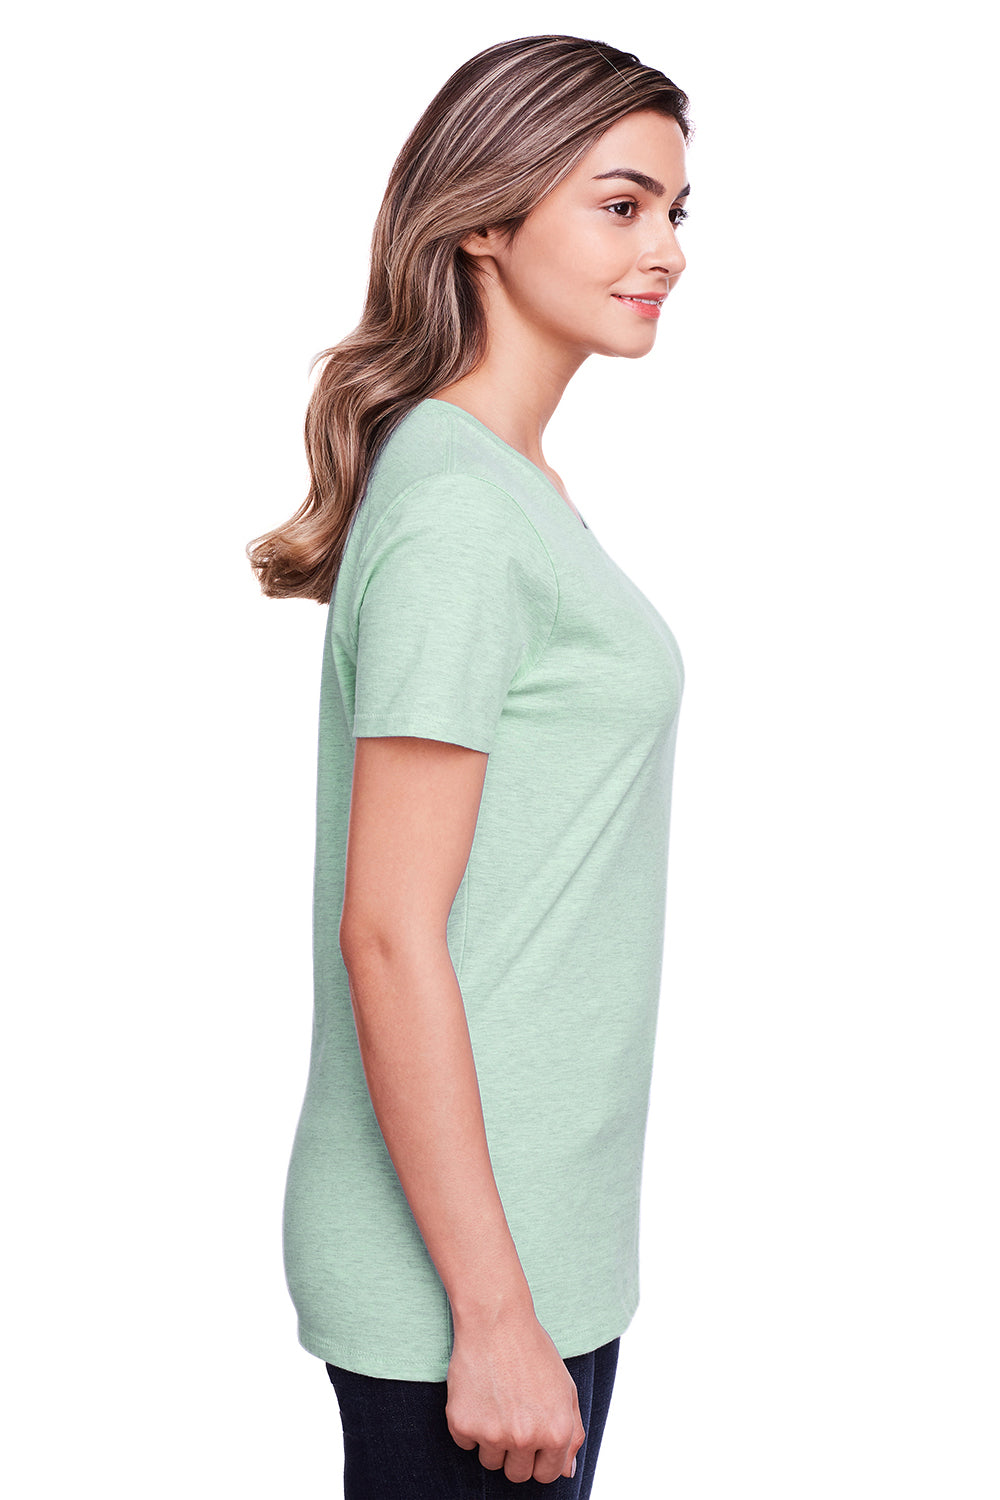 Fruit Of The Loom IC47WR Womens Iconic Short Sleeve Crewneck T-Shirt Heather Mint Green Side